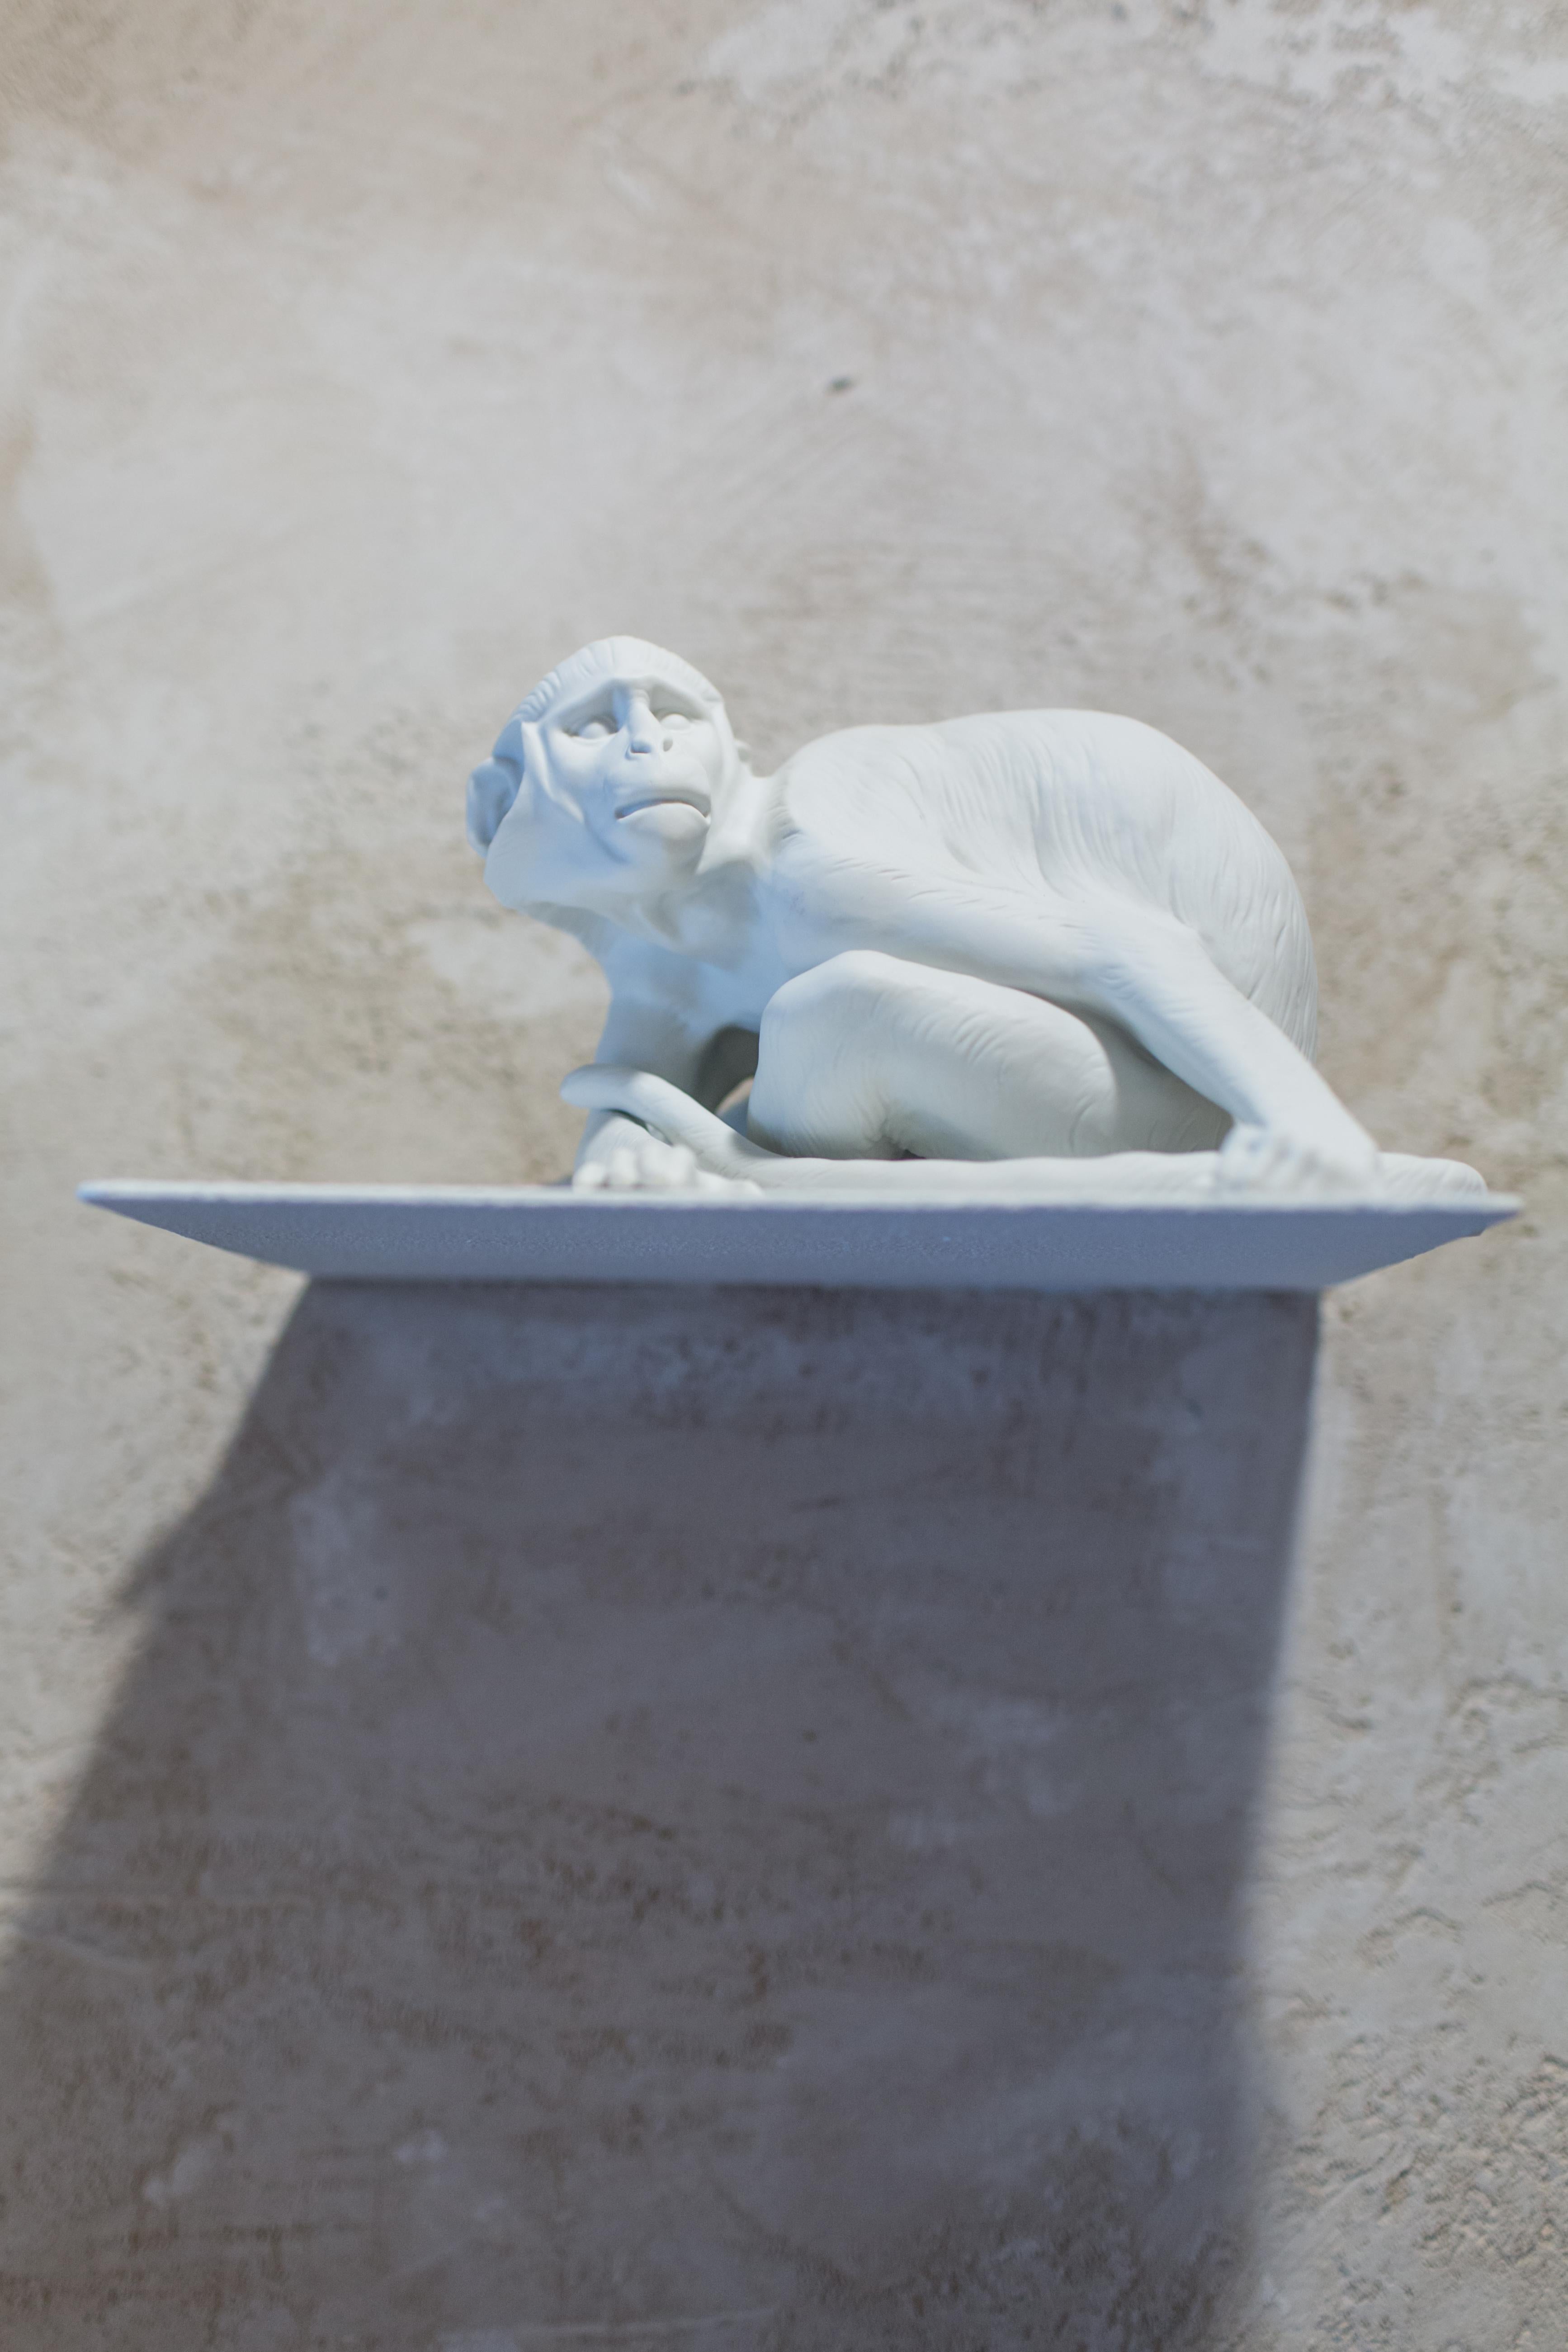 Designed by Theodor Kärner in 1906, this young monkey emphasizes the wealth of detail and depth of subtlety offered by white biscuit porcelain. 

Material: White biscuit porcelain.